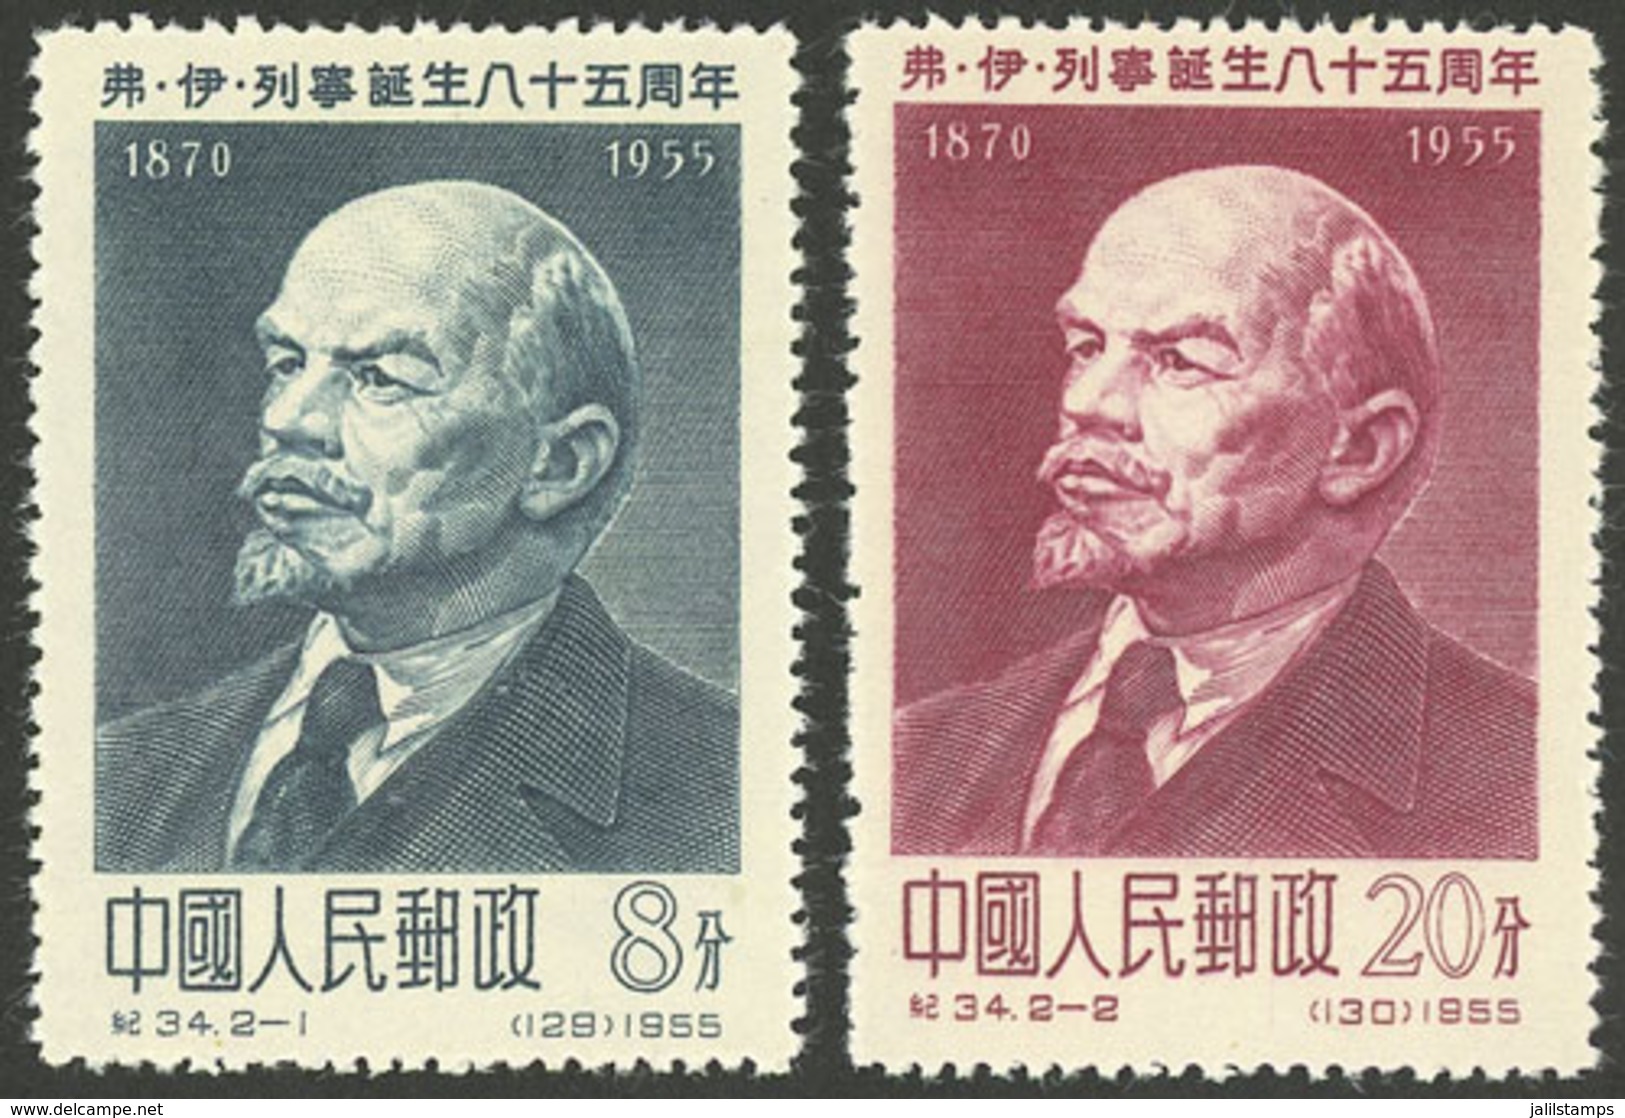 CHINA: Sc.267/268, 1955 Lenin, Cmpl. Set Of 2 Values, Mint Lightly Hinged (issued Without Gum), VF Quality! - Gebruikt